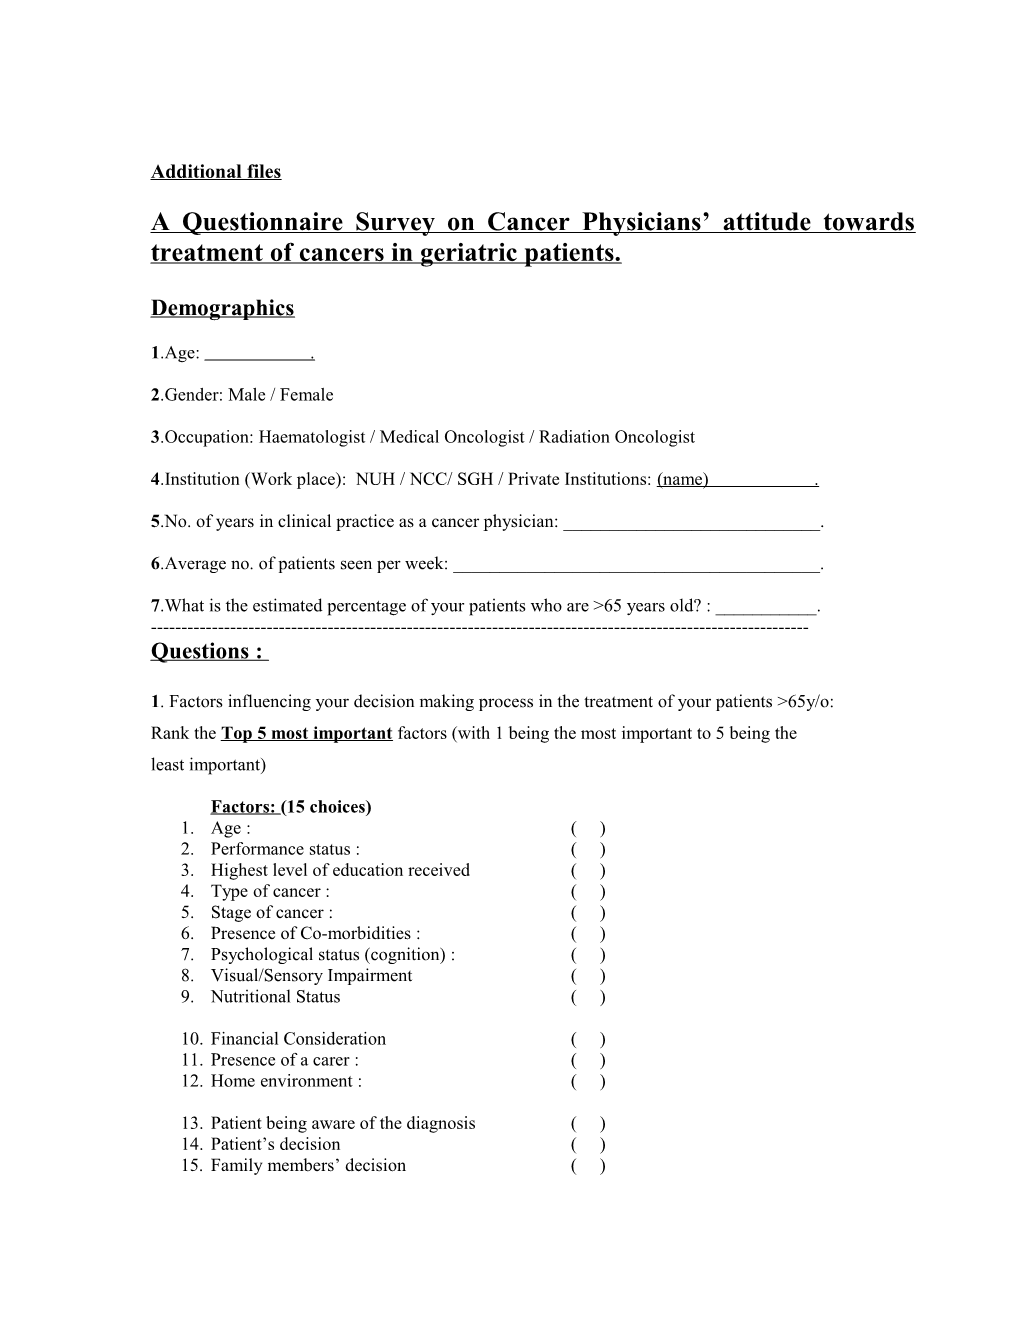 A Questionnaire Survey on Cancer Physicians Attitude Towards Treatment of Cancers in Geriatric